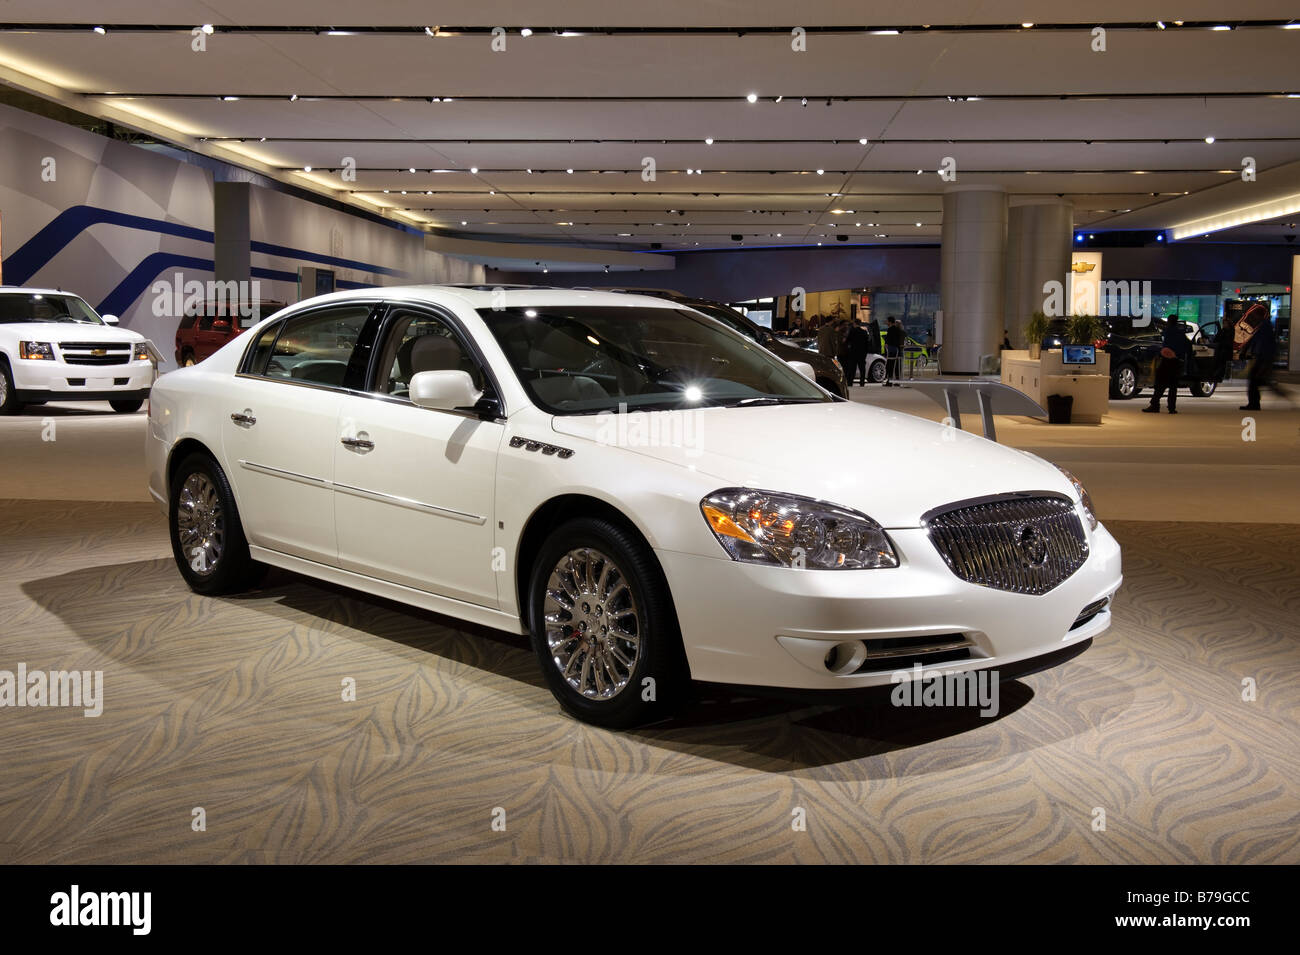 2009 Buick Lucerne at the 2009 North American International Auto Show in Detroit Michigan USA Stock Photo